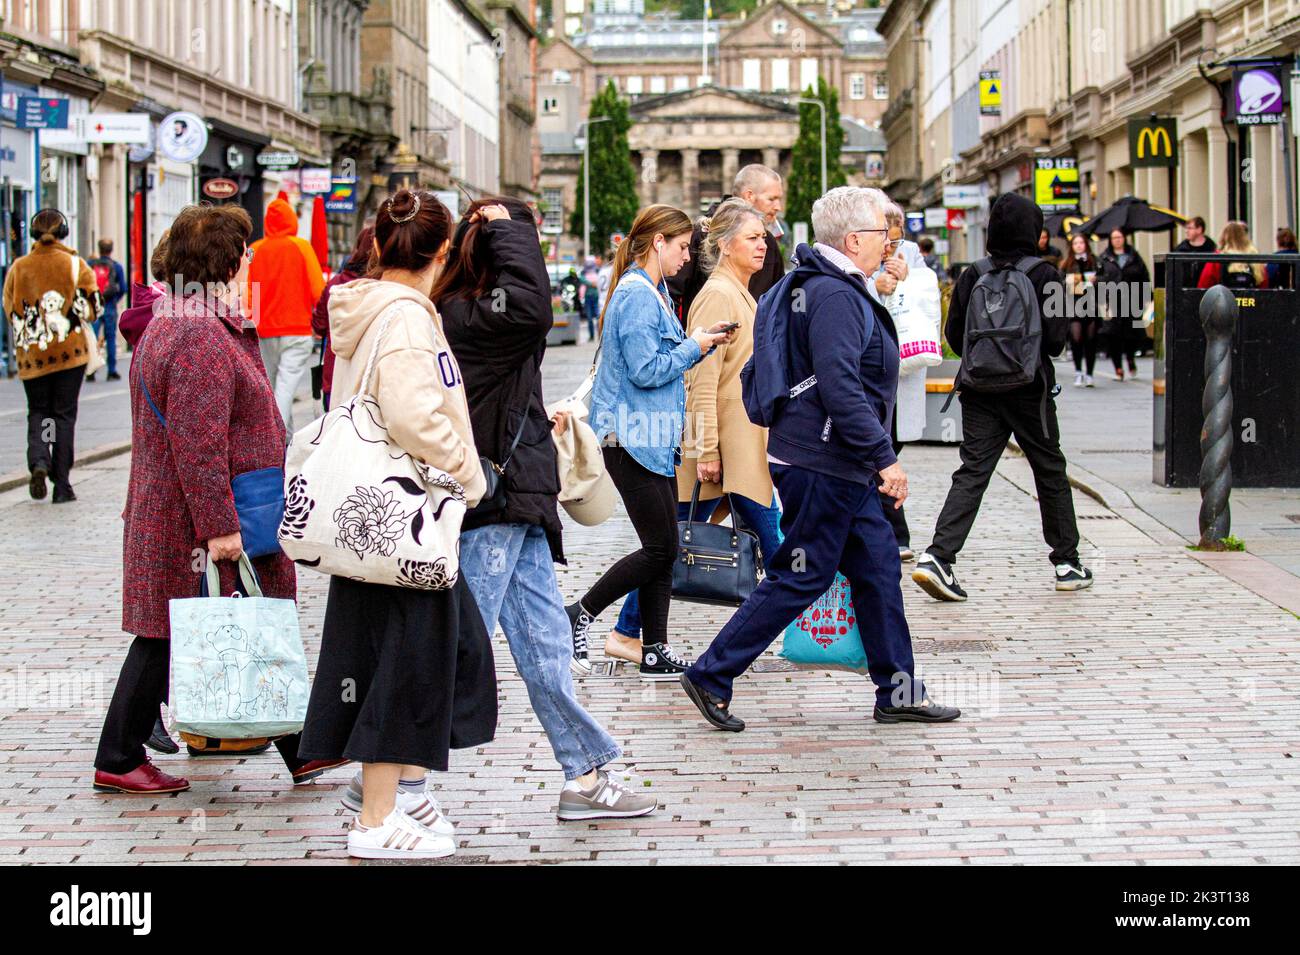 Dundee, Tayside, Scotland, UK. 28th September 2022. UK Weather: On this bright cold Autumn Day, temperatures in some parts of Northeast Scotland reached 14°C. In late September, local trendy women are out and about shopping in Dundee city centre, albeit cautiously due to the high cost of living. Credit: Dundee Photographics/Alamy Live News Stock Photo